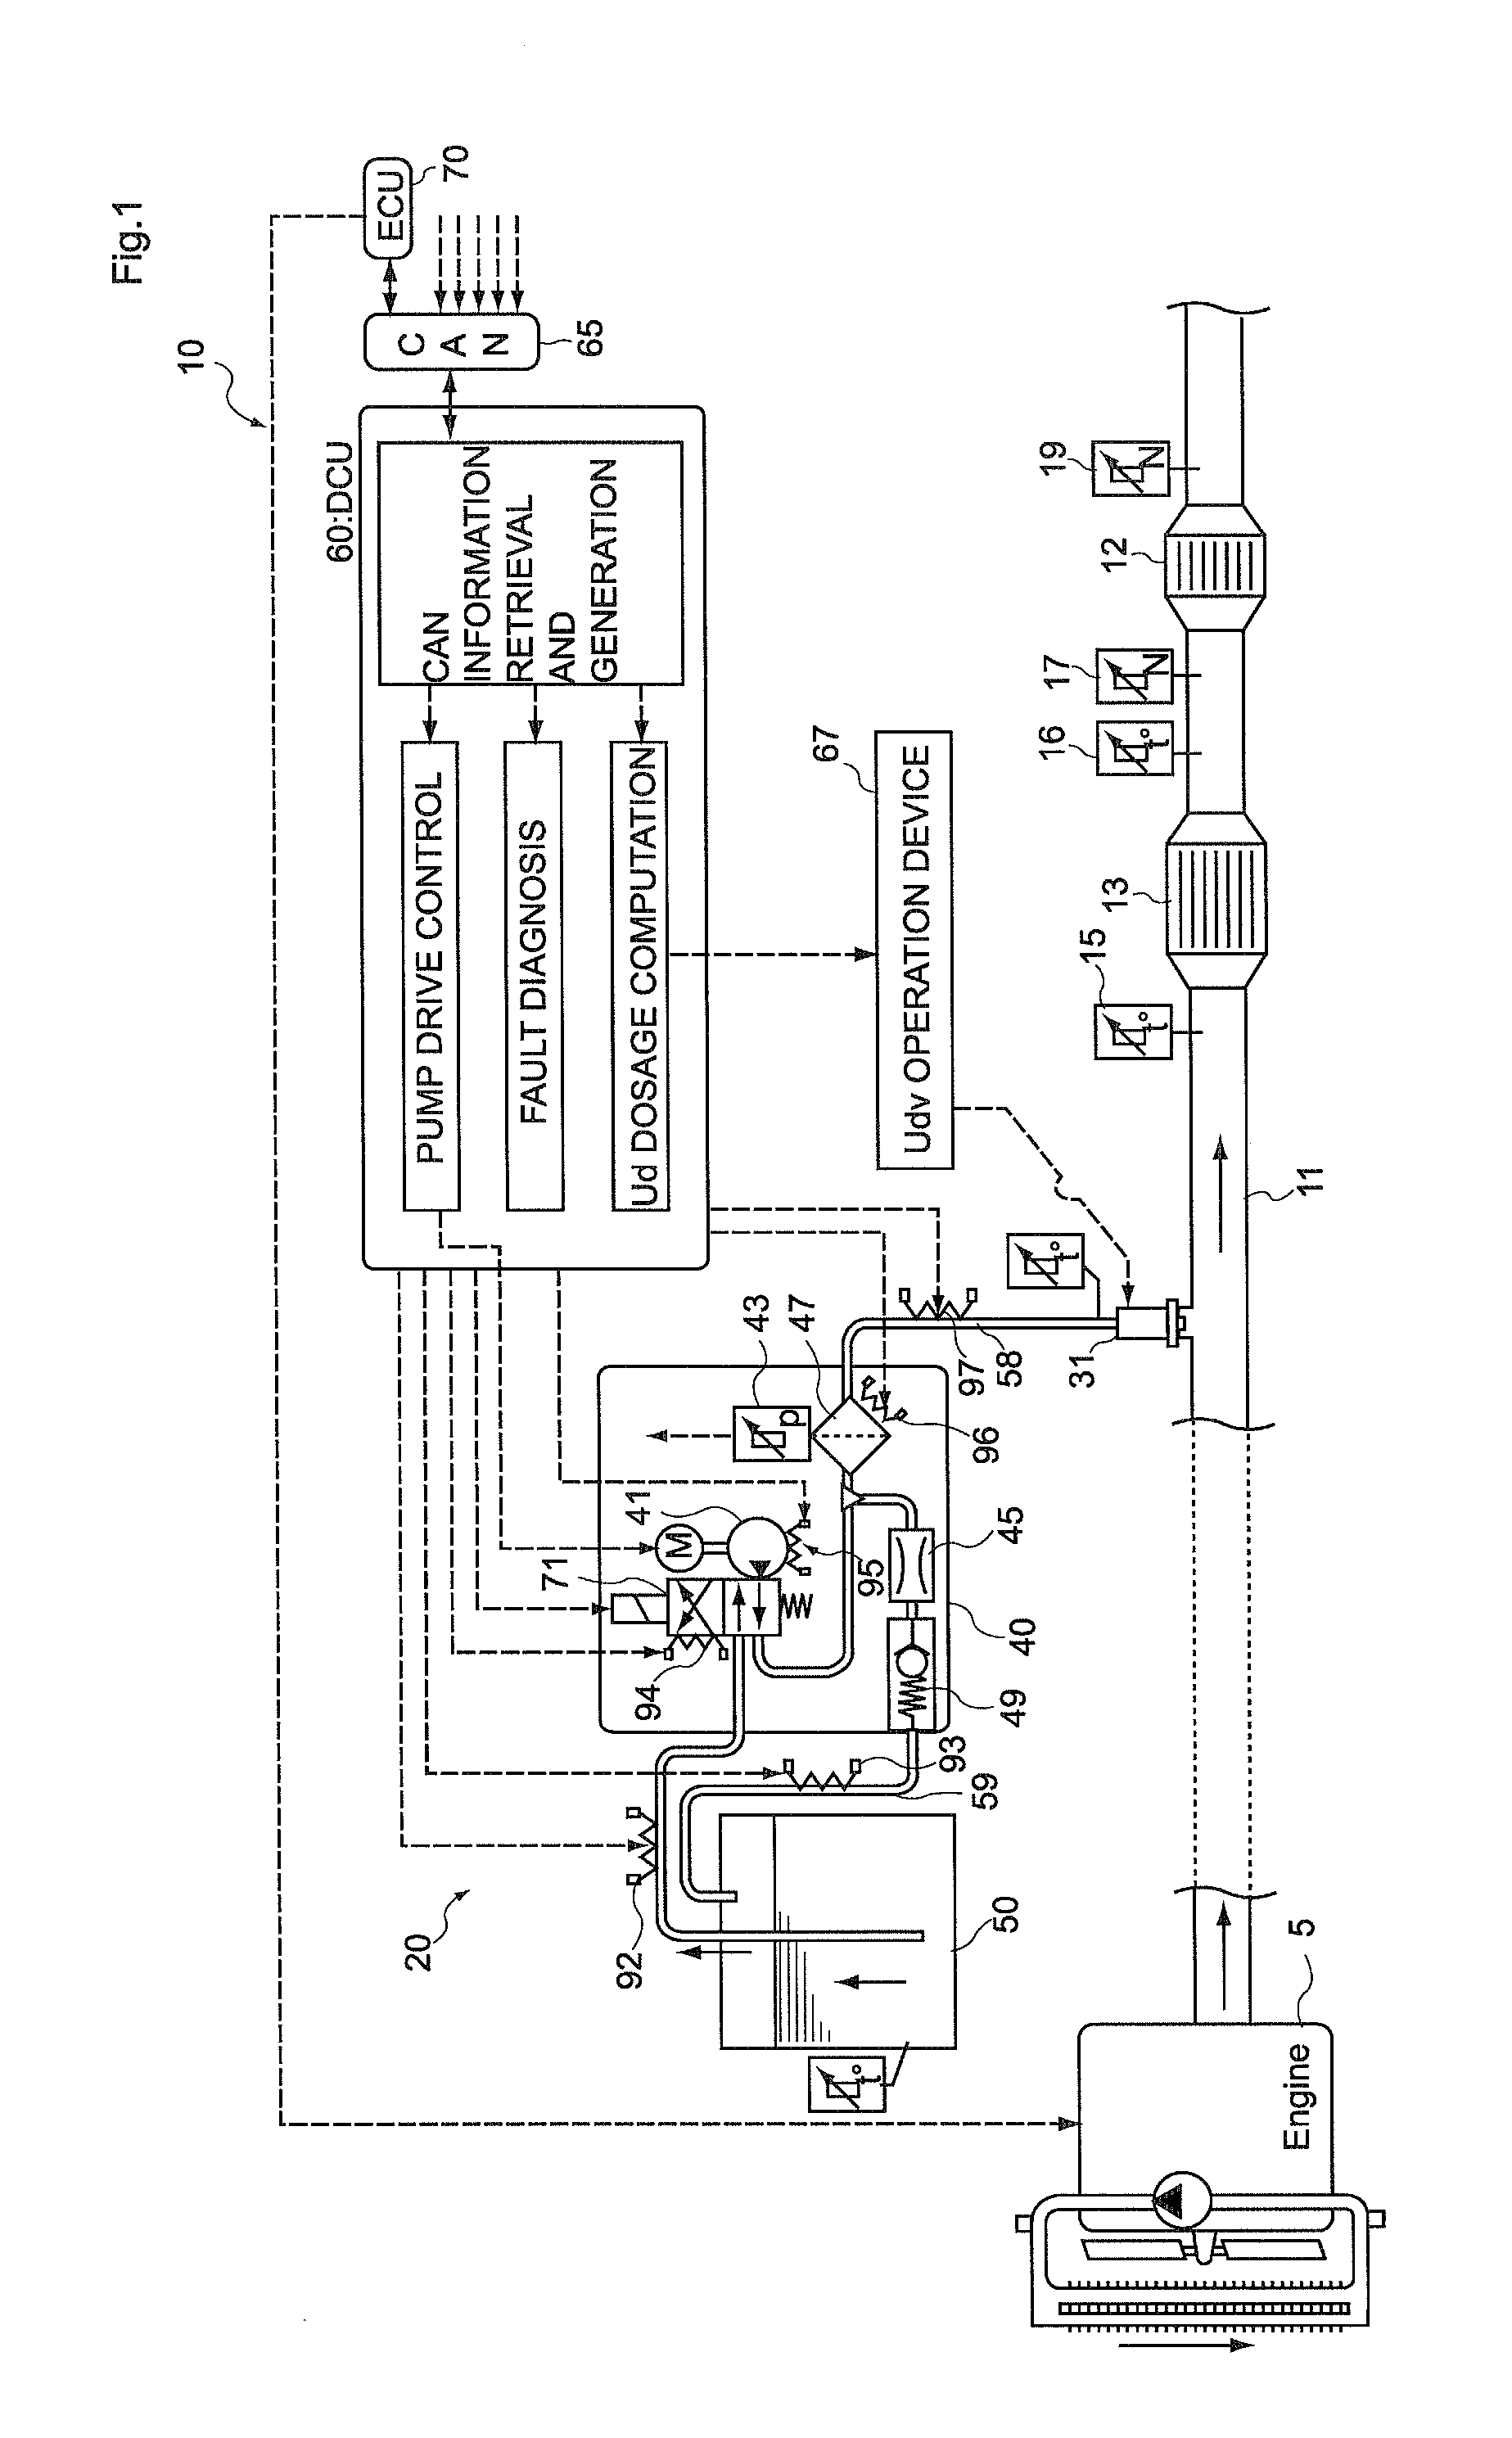 Oxidation catalyst fault diagnosis unit and oxidation catalyst fault diagnosis method and internal combustion engine exhaust purification apparatus